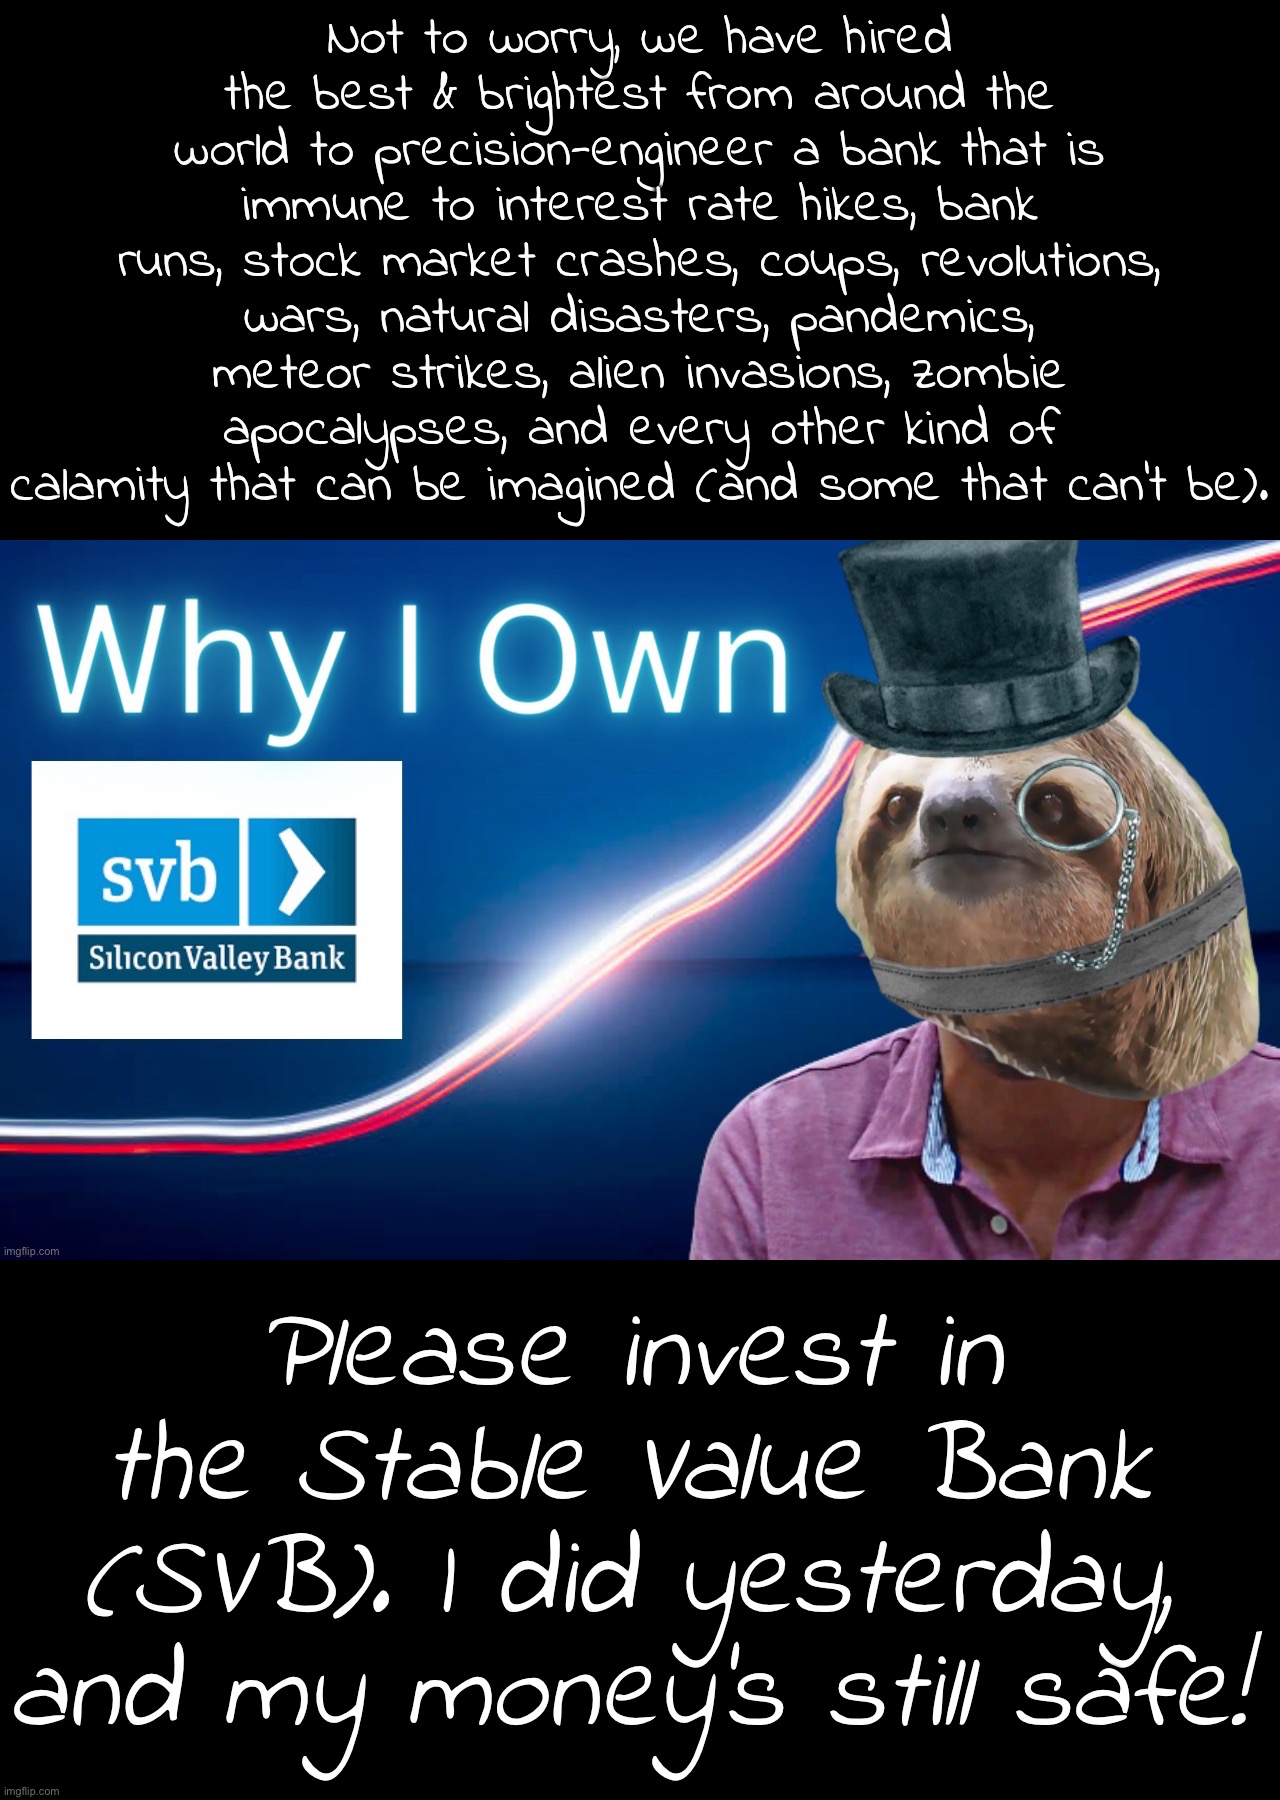 Pro-SVB testimonial from our visionary Founder — and very first satisfied customer! #svb #invest | Not to worry, we have hired the best & brightest from around the world to precision-engineer a bank that is immune to interest rate hikes, bank runs, stock market crashes, coups, revolutions, wars, natural disasters, pandemics, meteor strikes, alien invasions, zombie apocalypses, and every other kind of calamity that can be imagined (and some that can’t be). Please invest in the Stable Value Bank (SVB). I did yesterday, and my money’s still safe! | image tagged in sloth why i own stable value bank,svb,s,v,b,stable value bank | made w/ Imgflip meme maker